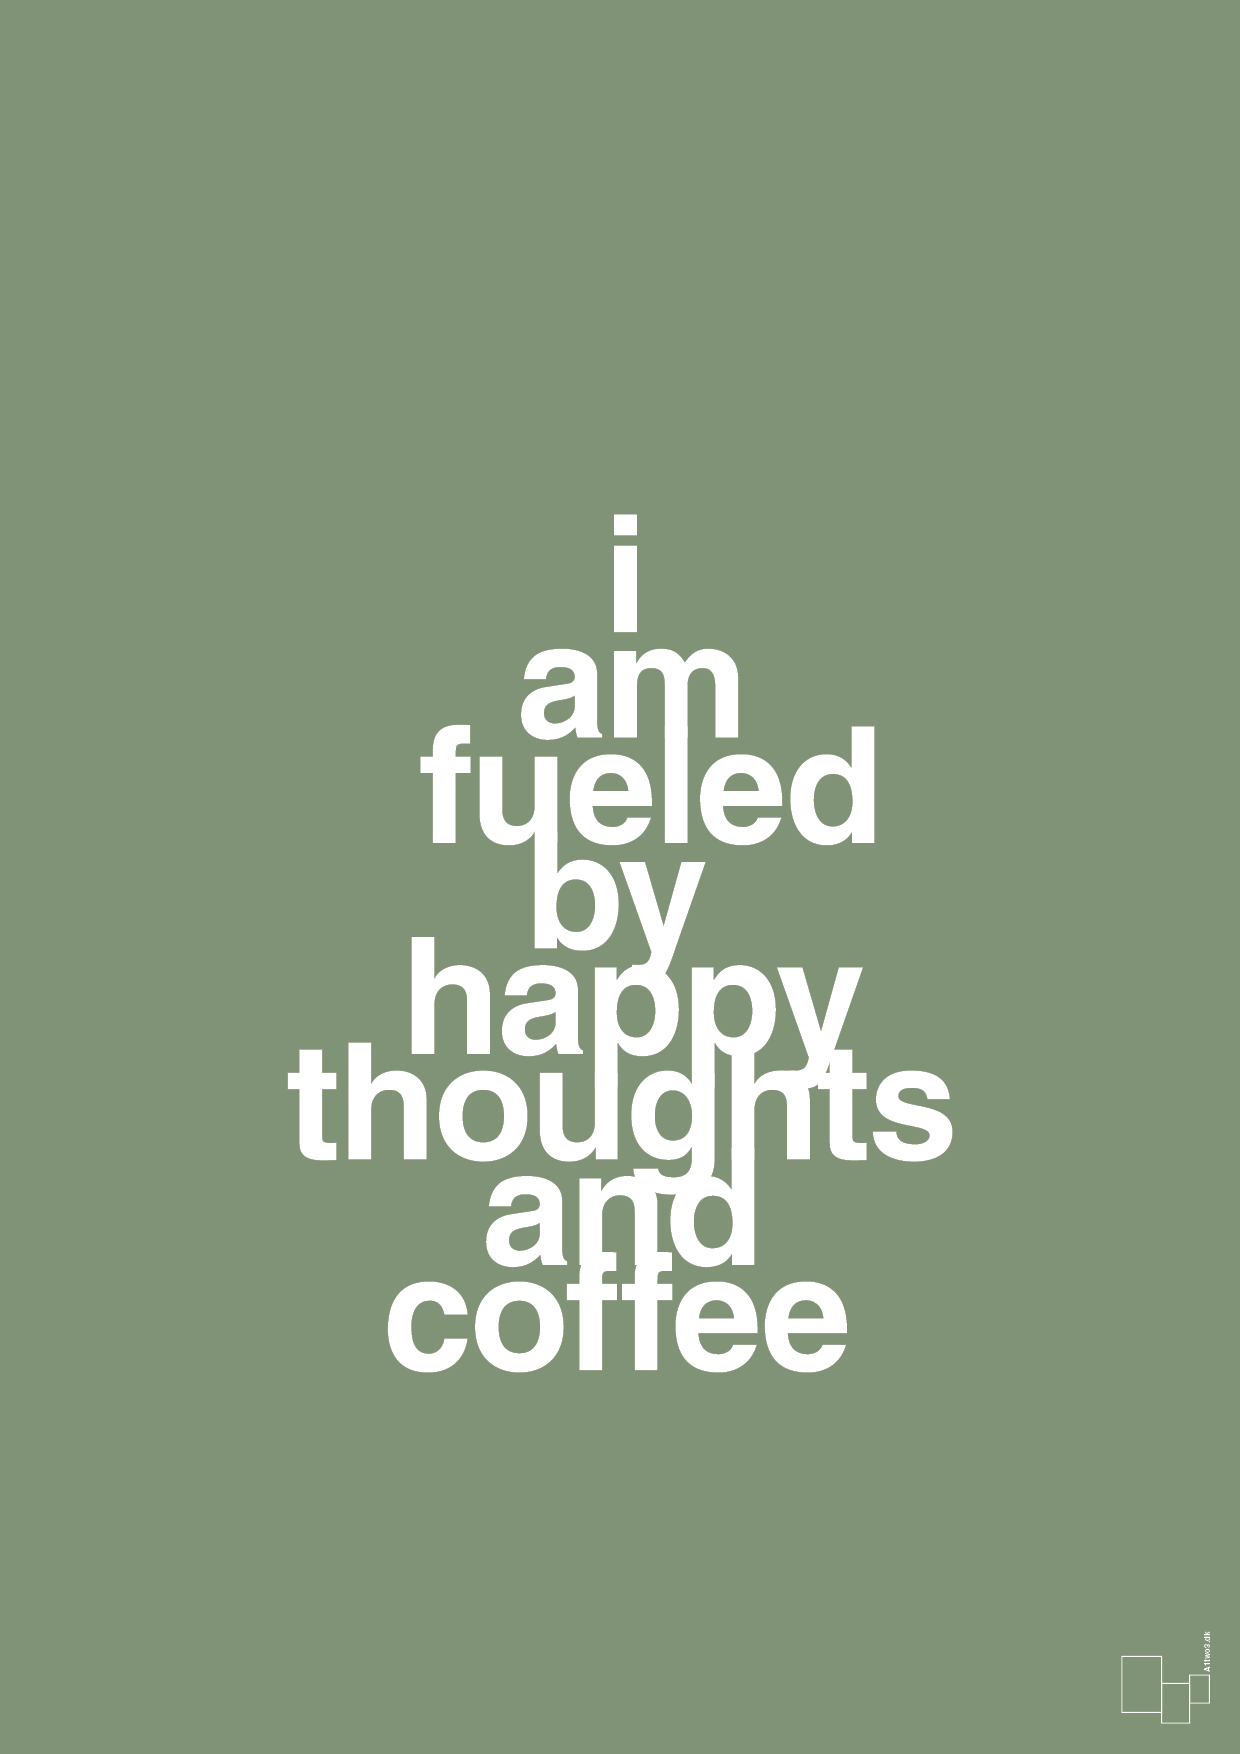 i am fueled by happy thoughts and coffee - Plakat med Mad & Drikke i Jade